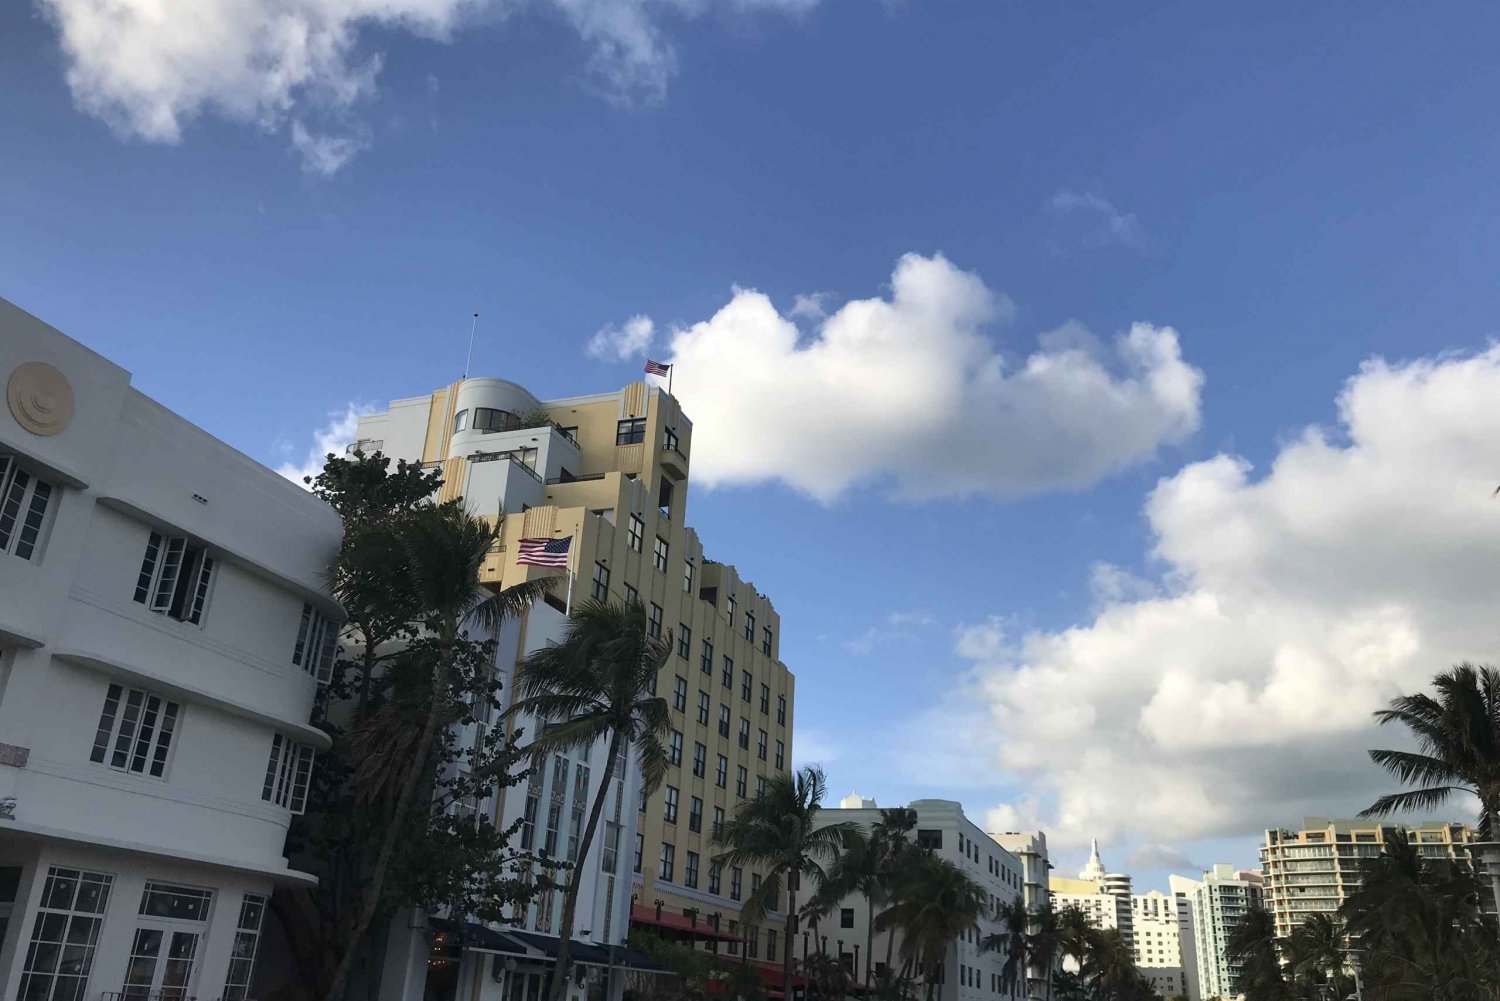 From Orlando: Miami Day Trip with Upgrade Options